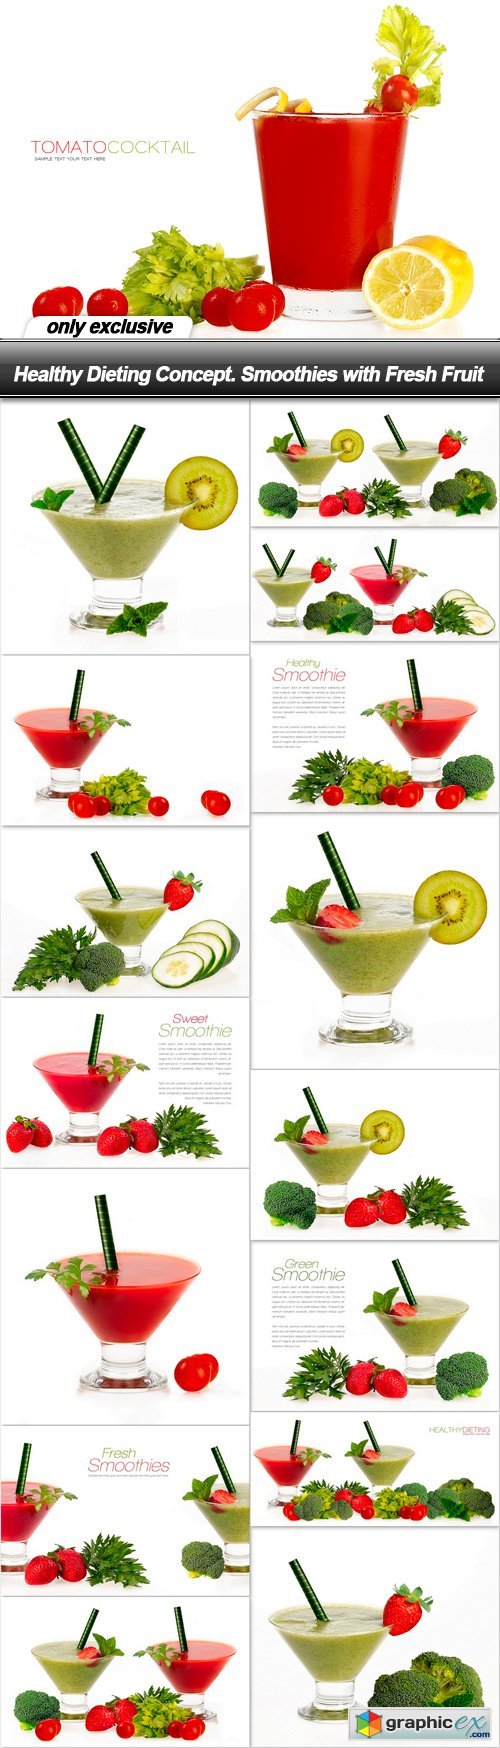 Healthy Dieting Concept. Smoothies with Fresh Fruit - 16 UHQ JPEG